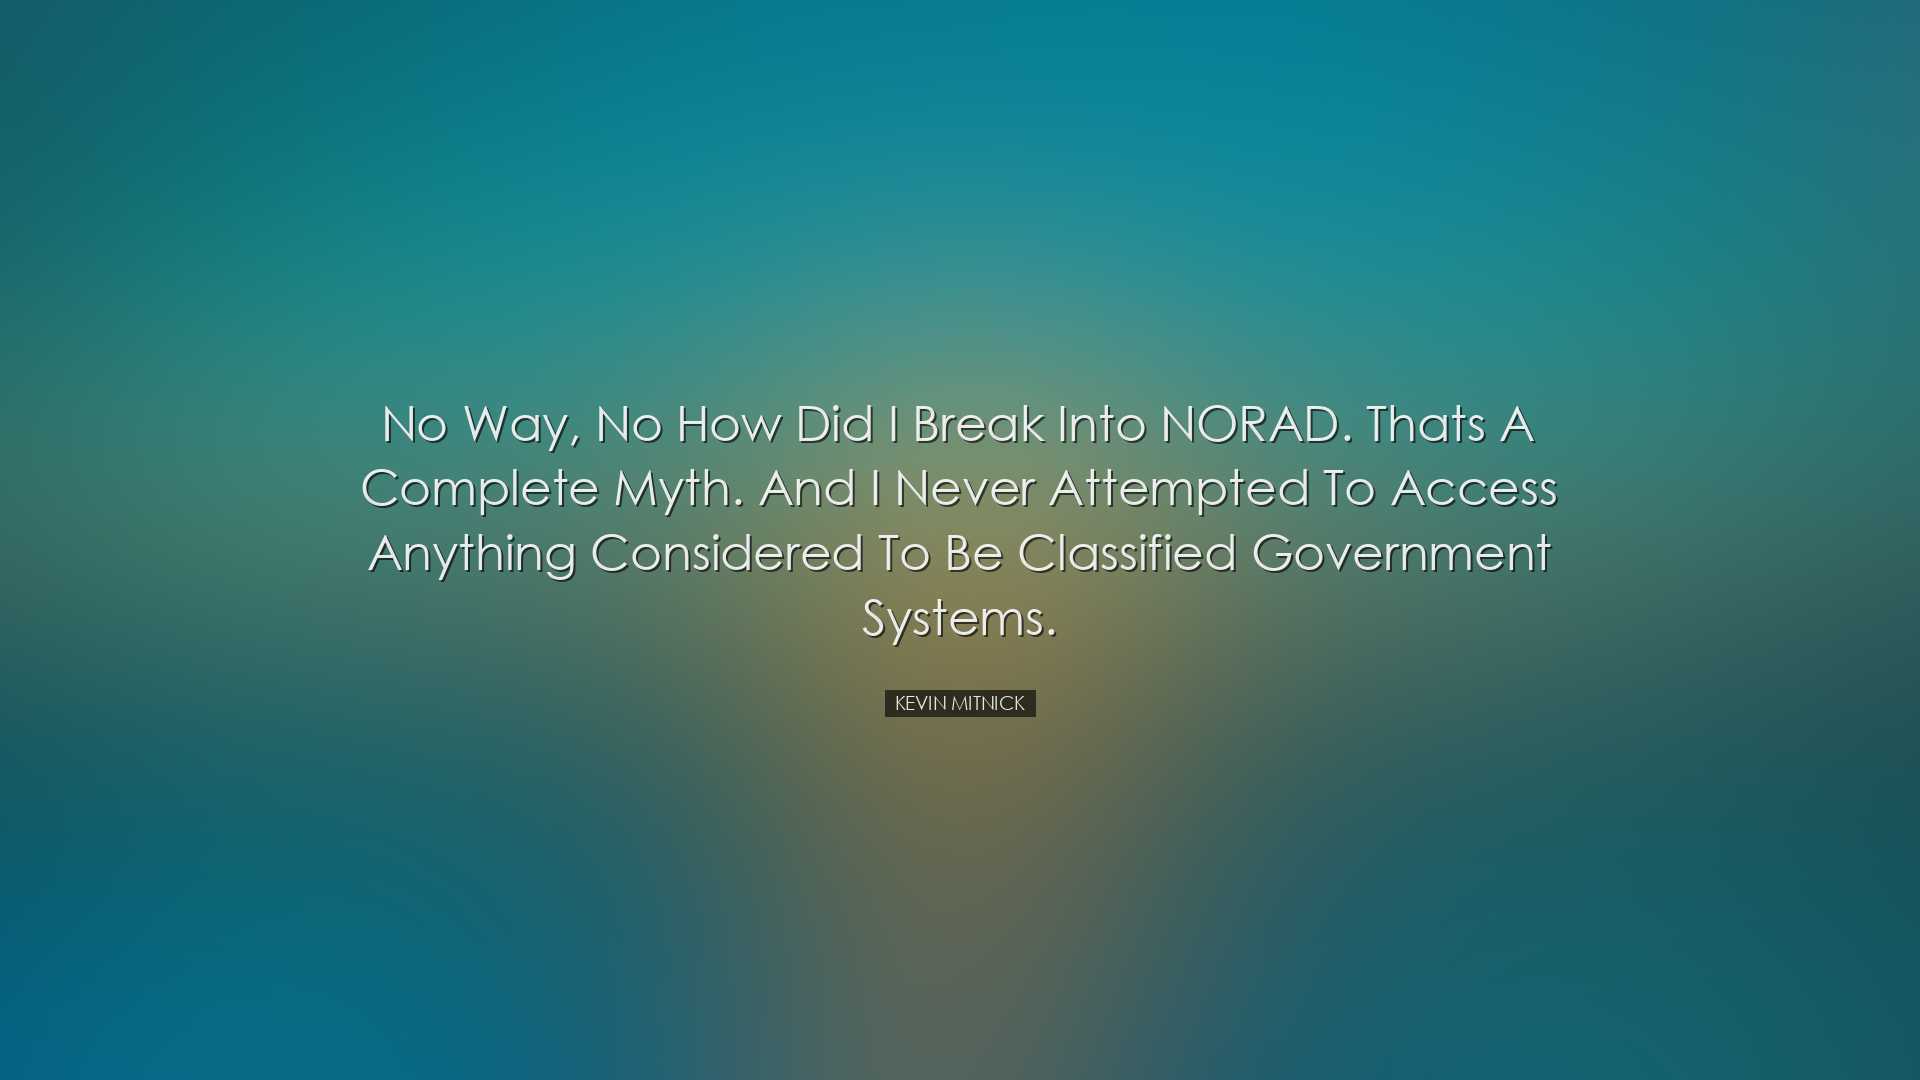 No way, no how did I break into NORAD. Thats a complete myth. And